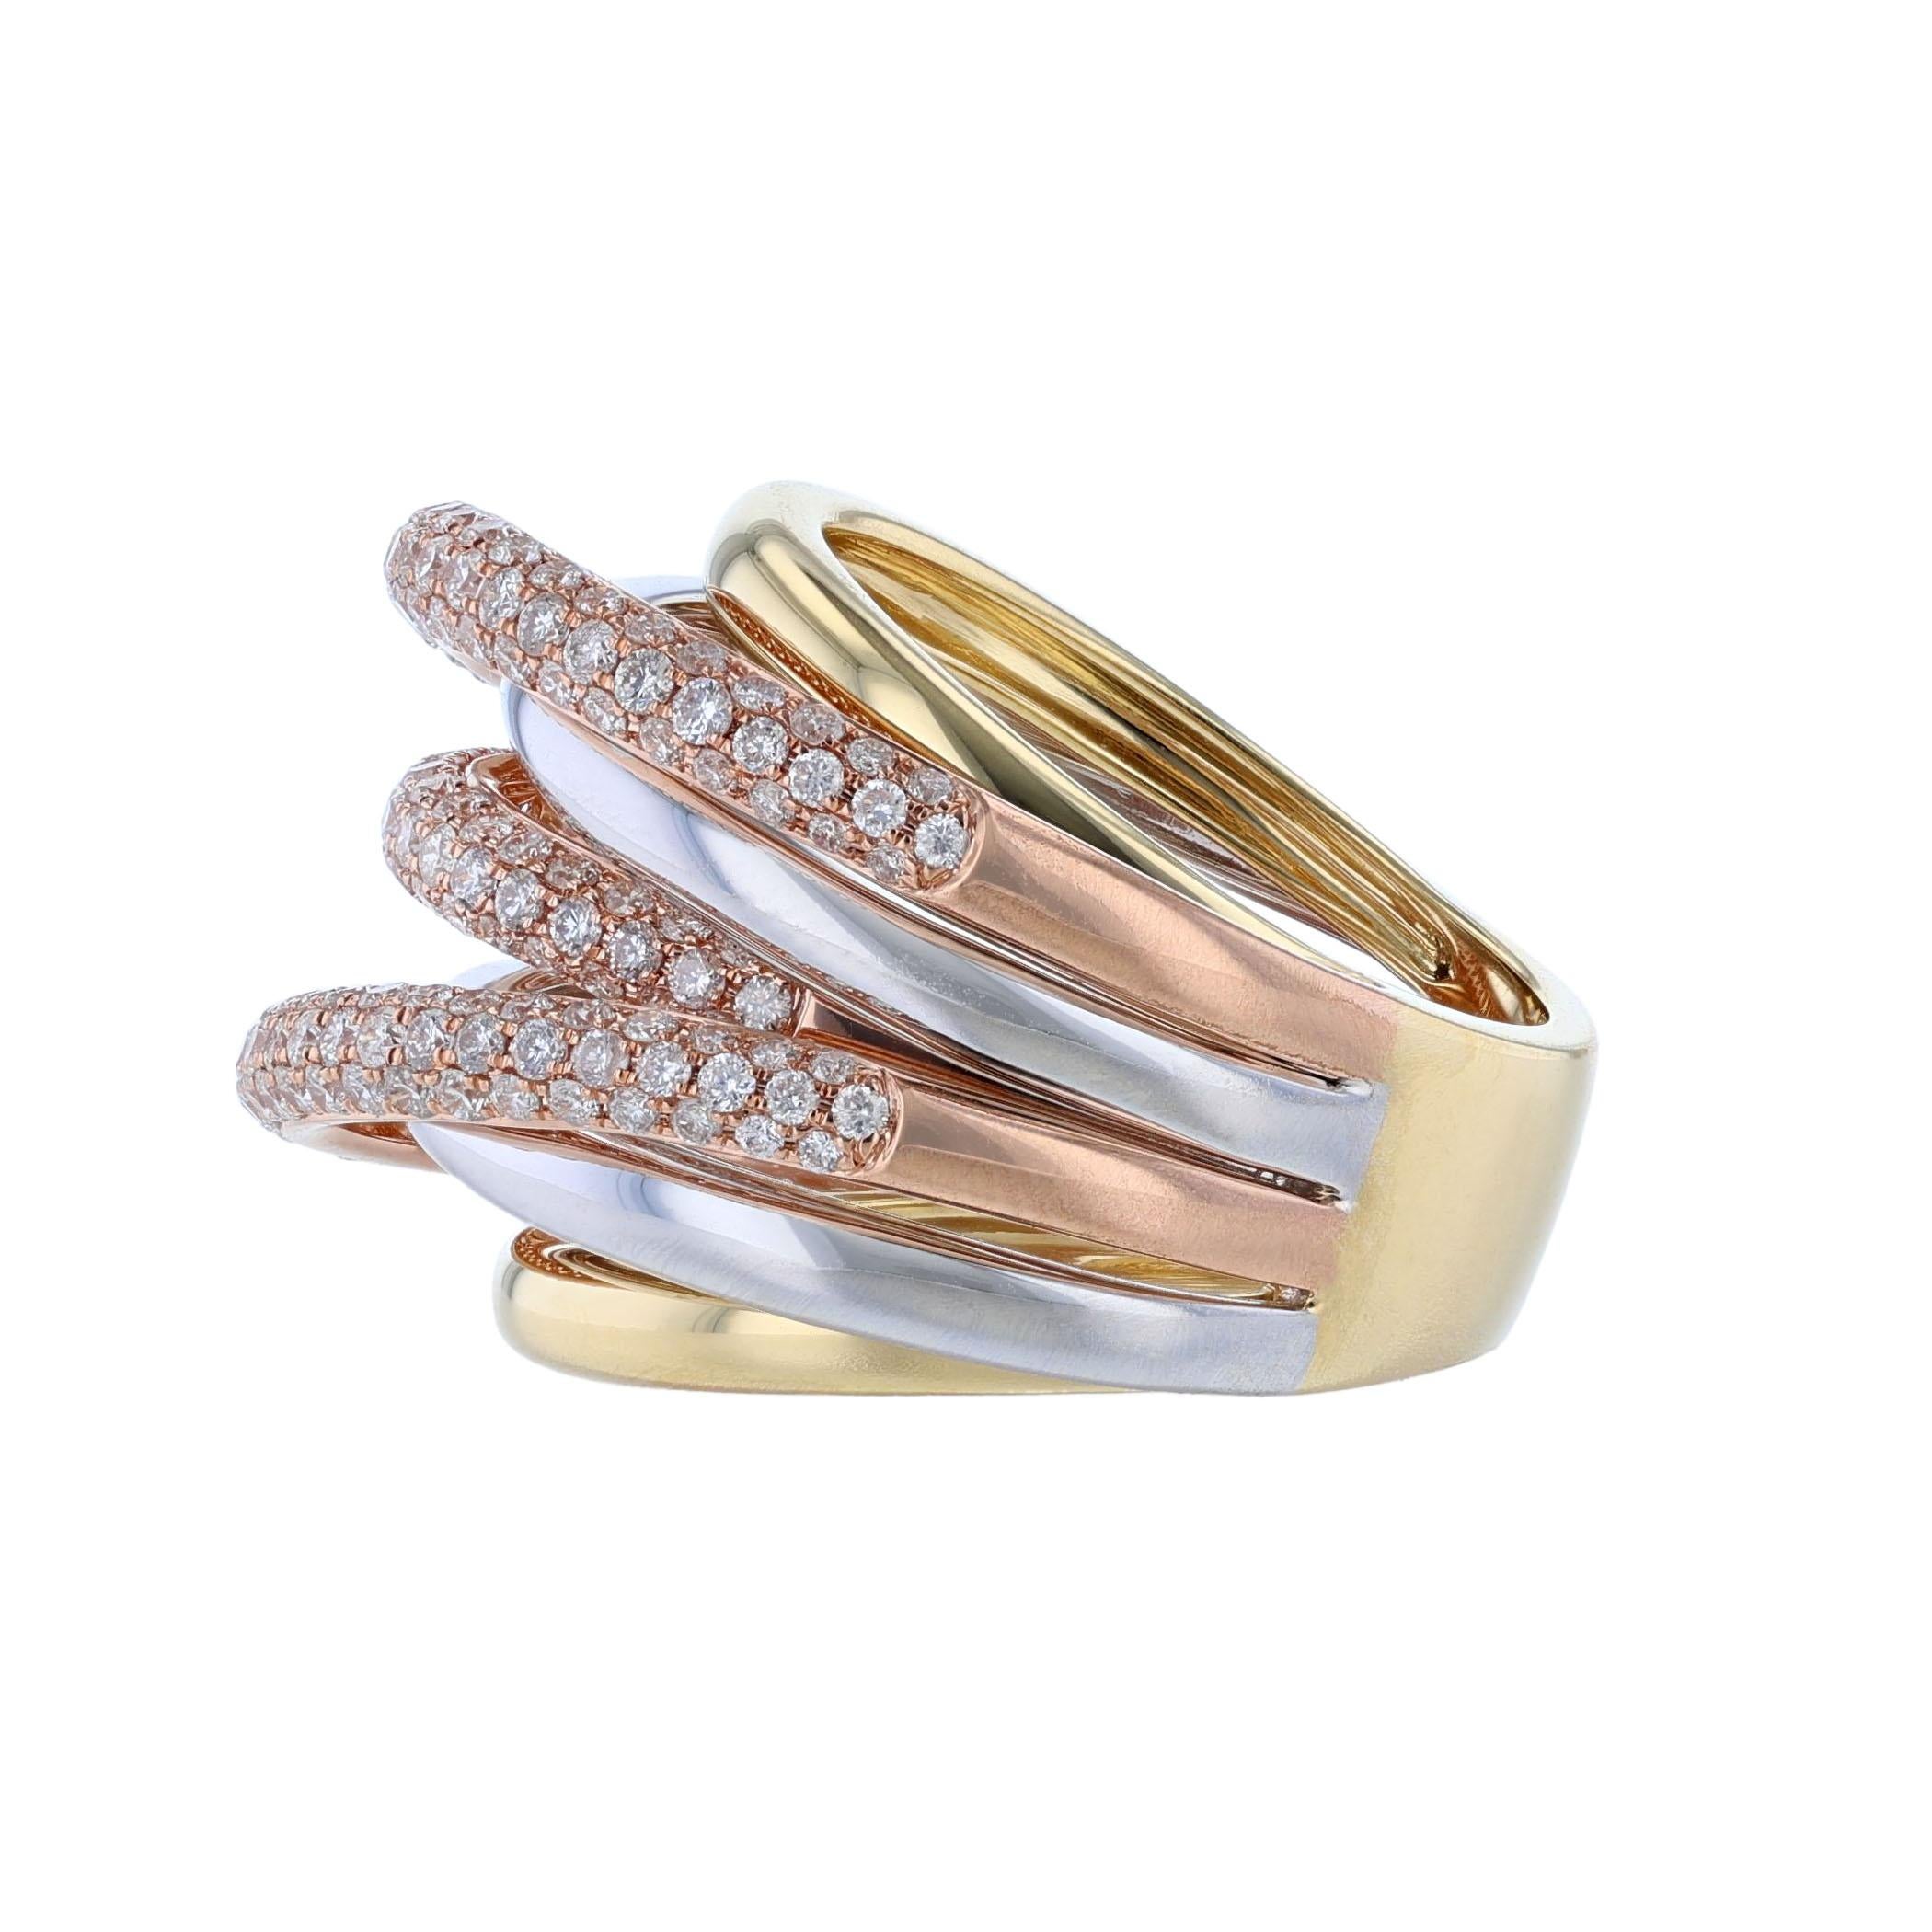 This ring is made in 18 Karat white, yellow, and rose gold. It features 237 round cut, pave' set diamonds weighing 2.07 carats. With a color grade (H) and clarity grade (SI2). 

